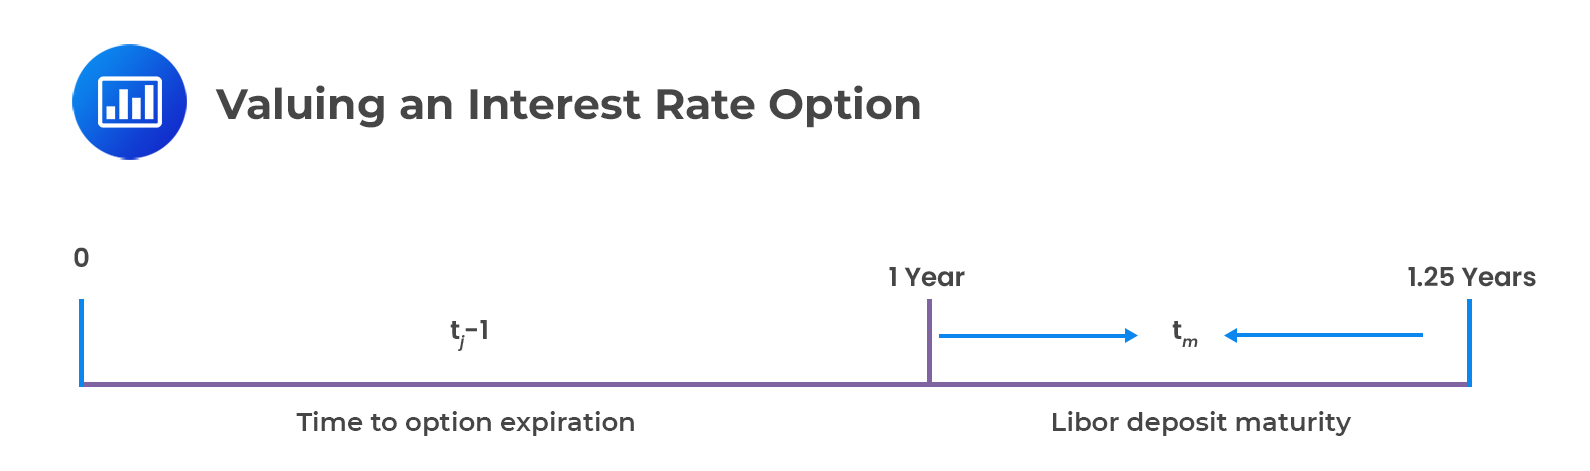 Valuing an Interest Rate Option